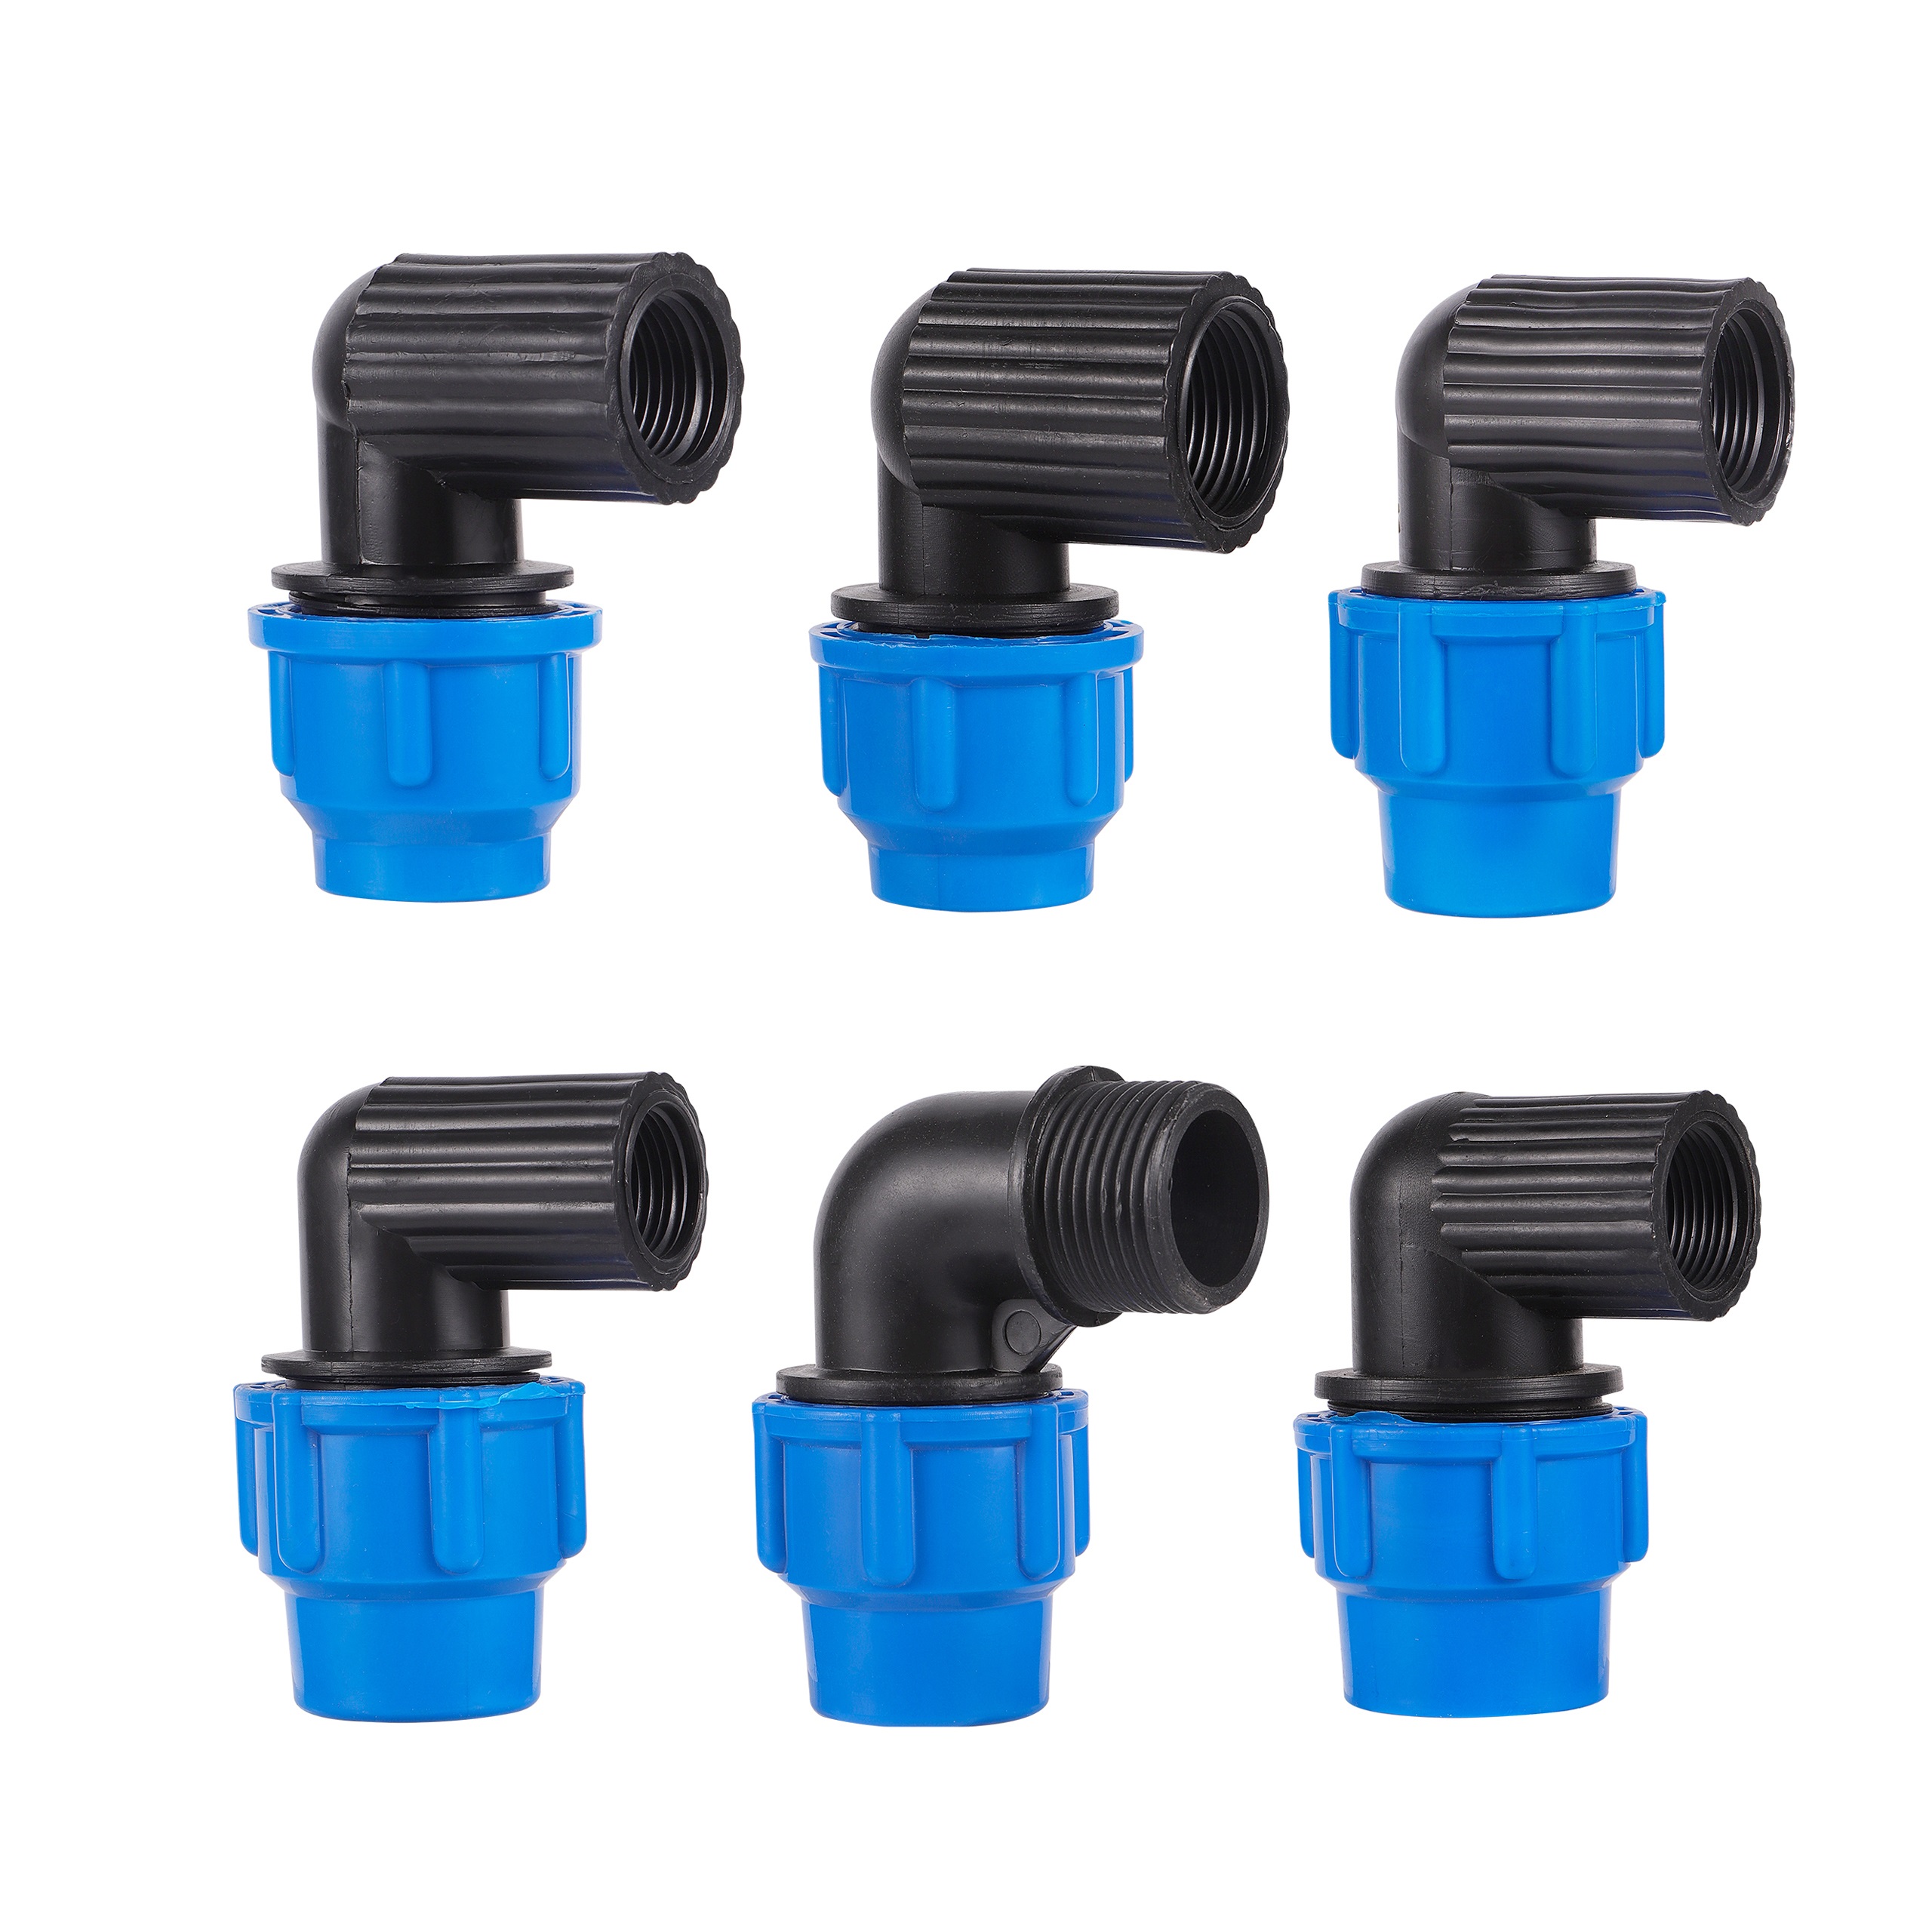 20/25/32mm PE Pipe Quick Connector Elbow Reducing Water Pipe Joint Plastic Female Thread 1/2" 3/4" Pvc Fittings